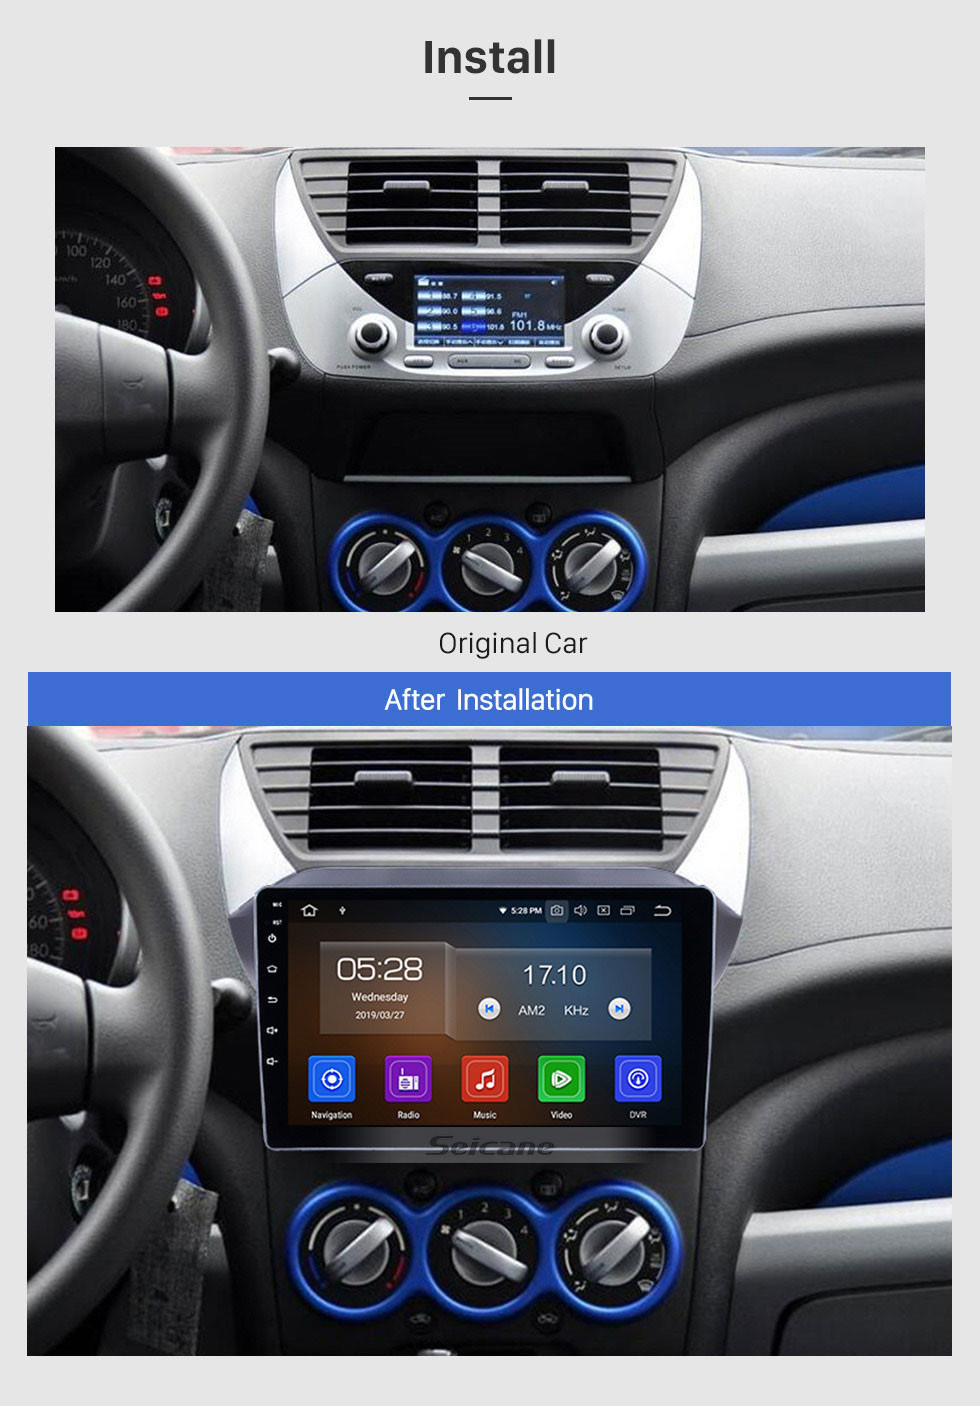  Car Radio Stereo for Suzuki Alto 2009-2016, Android 12 Head  Unit Touch Screen Built in Apple Carplay Andriod Auto DSP IPS Bluetooth GPS  Navigation (4-Core 2+32GB) : Electronics